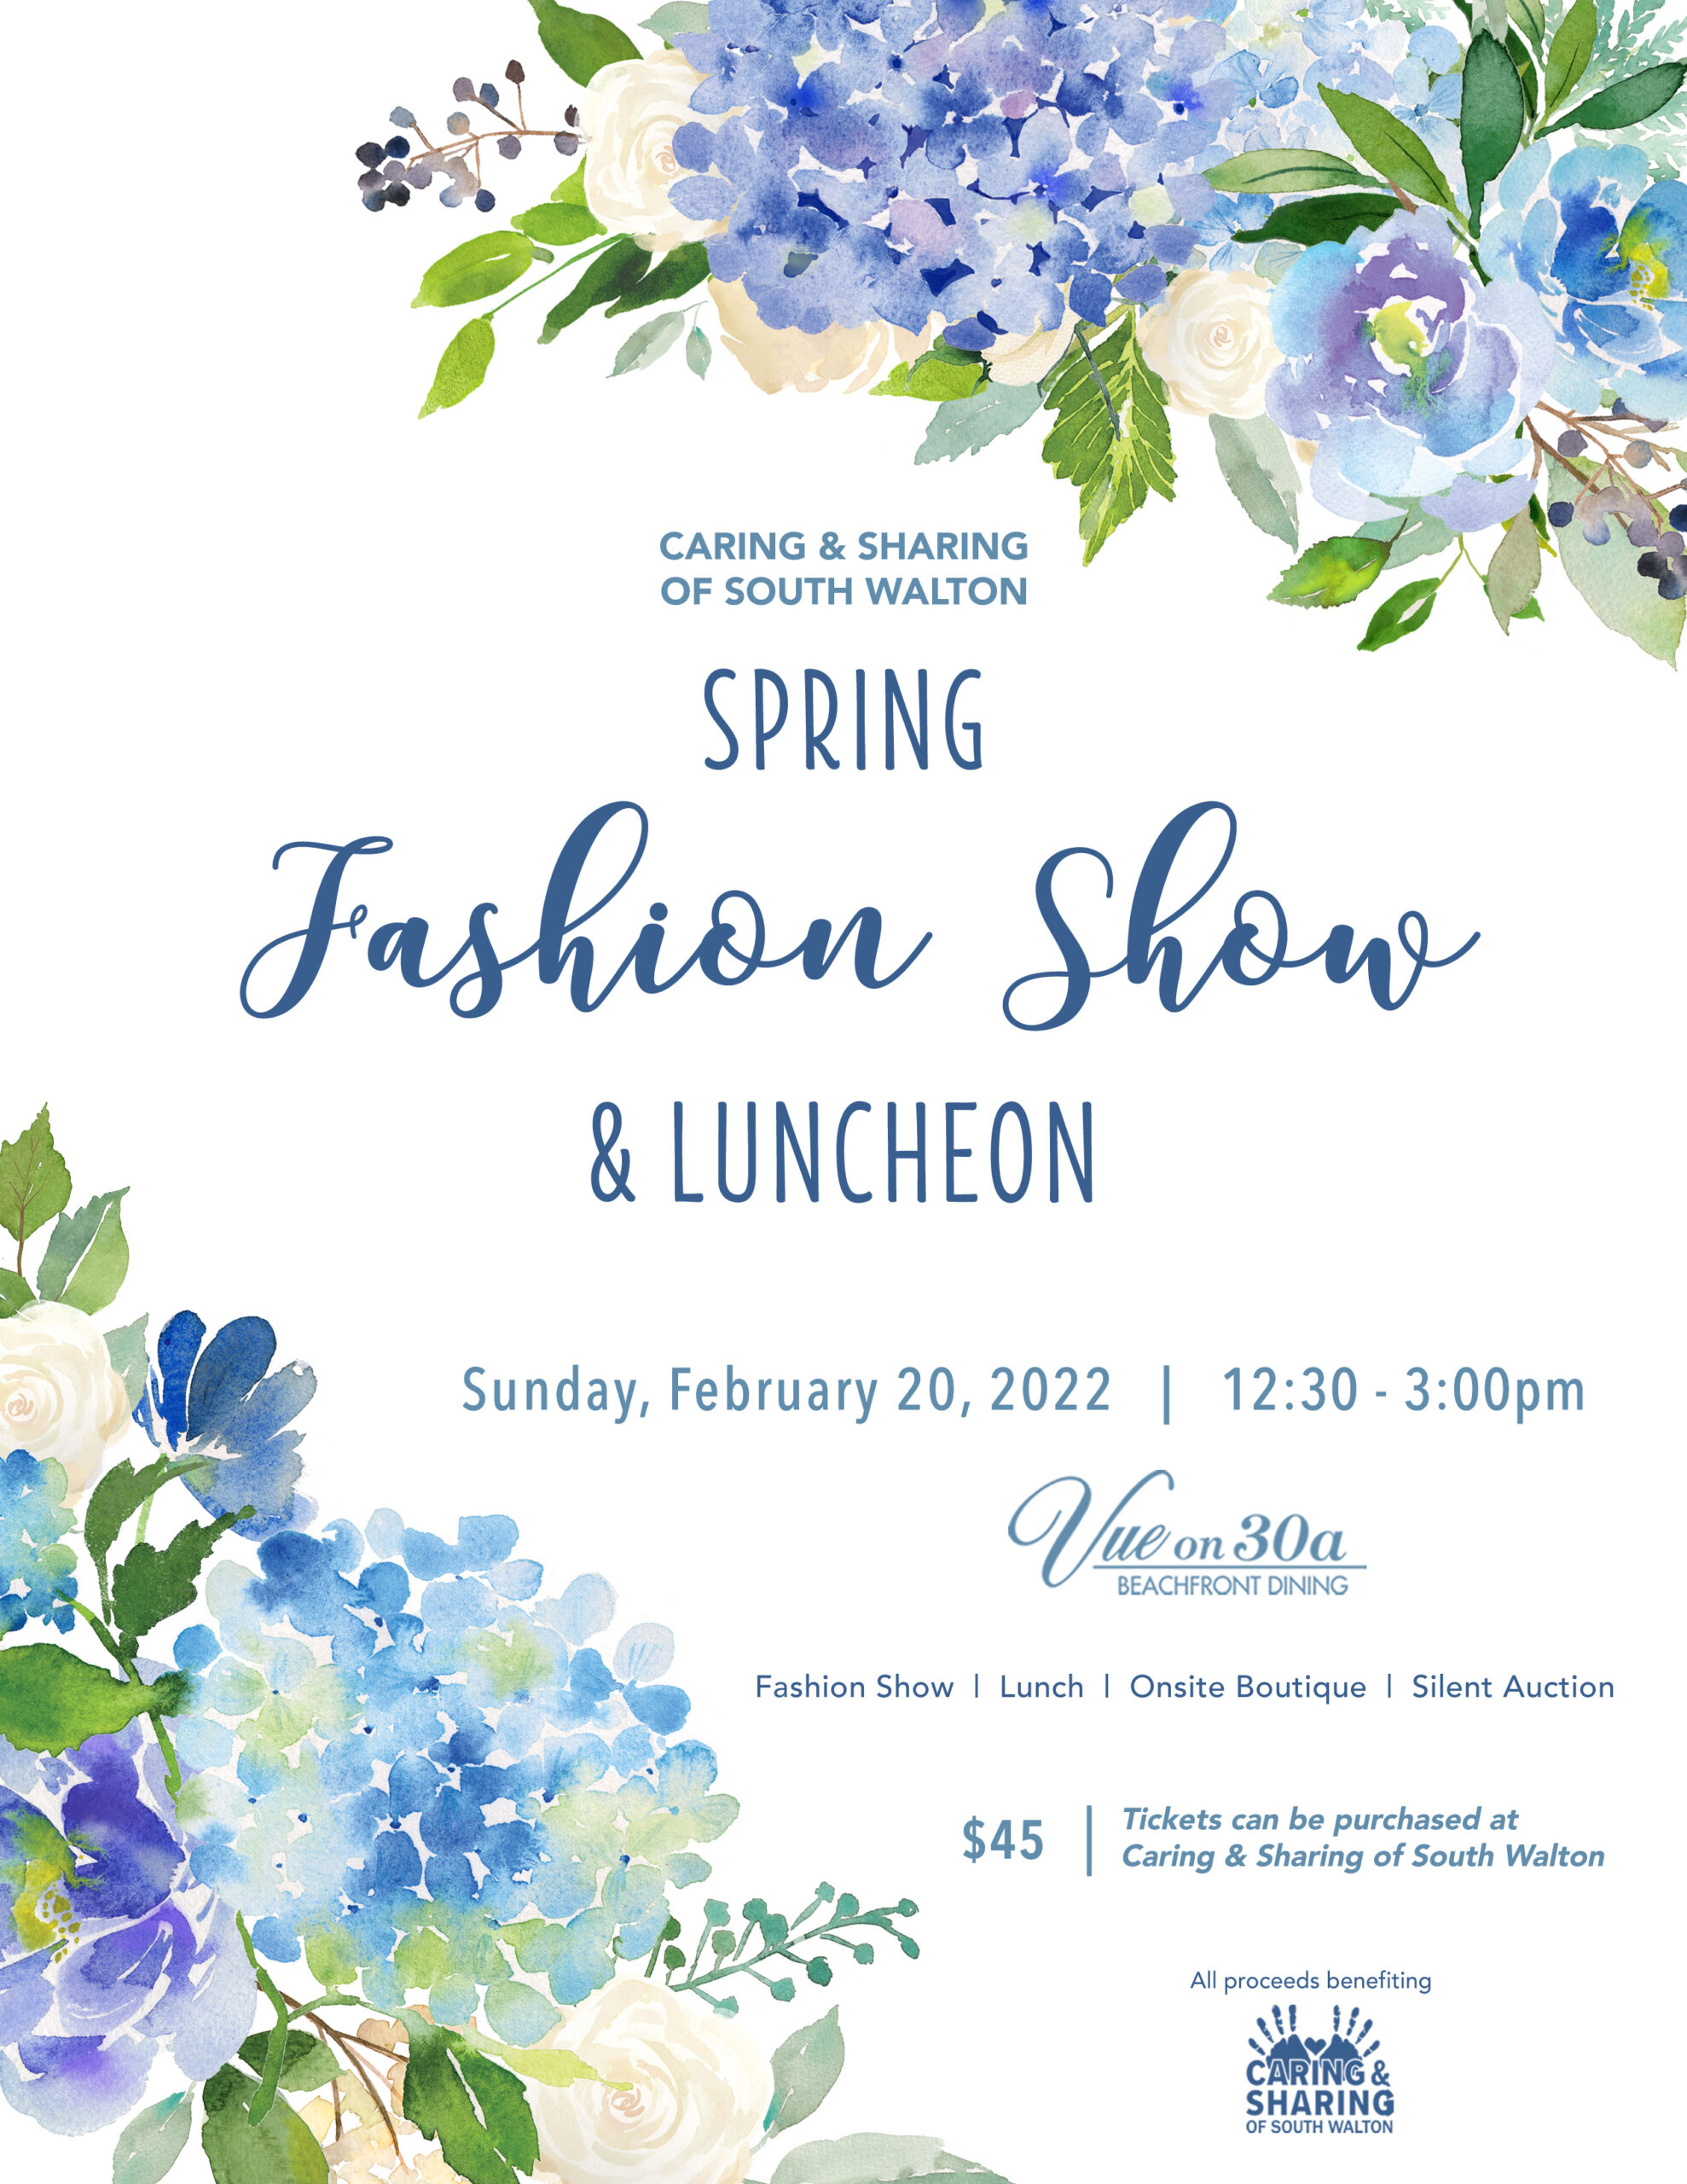 Caring & Sharing of South Walton to hold Spring Fashion Show